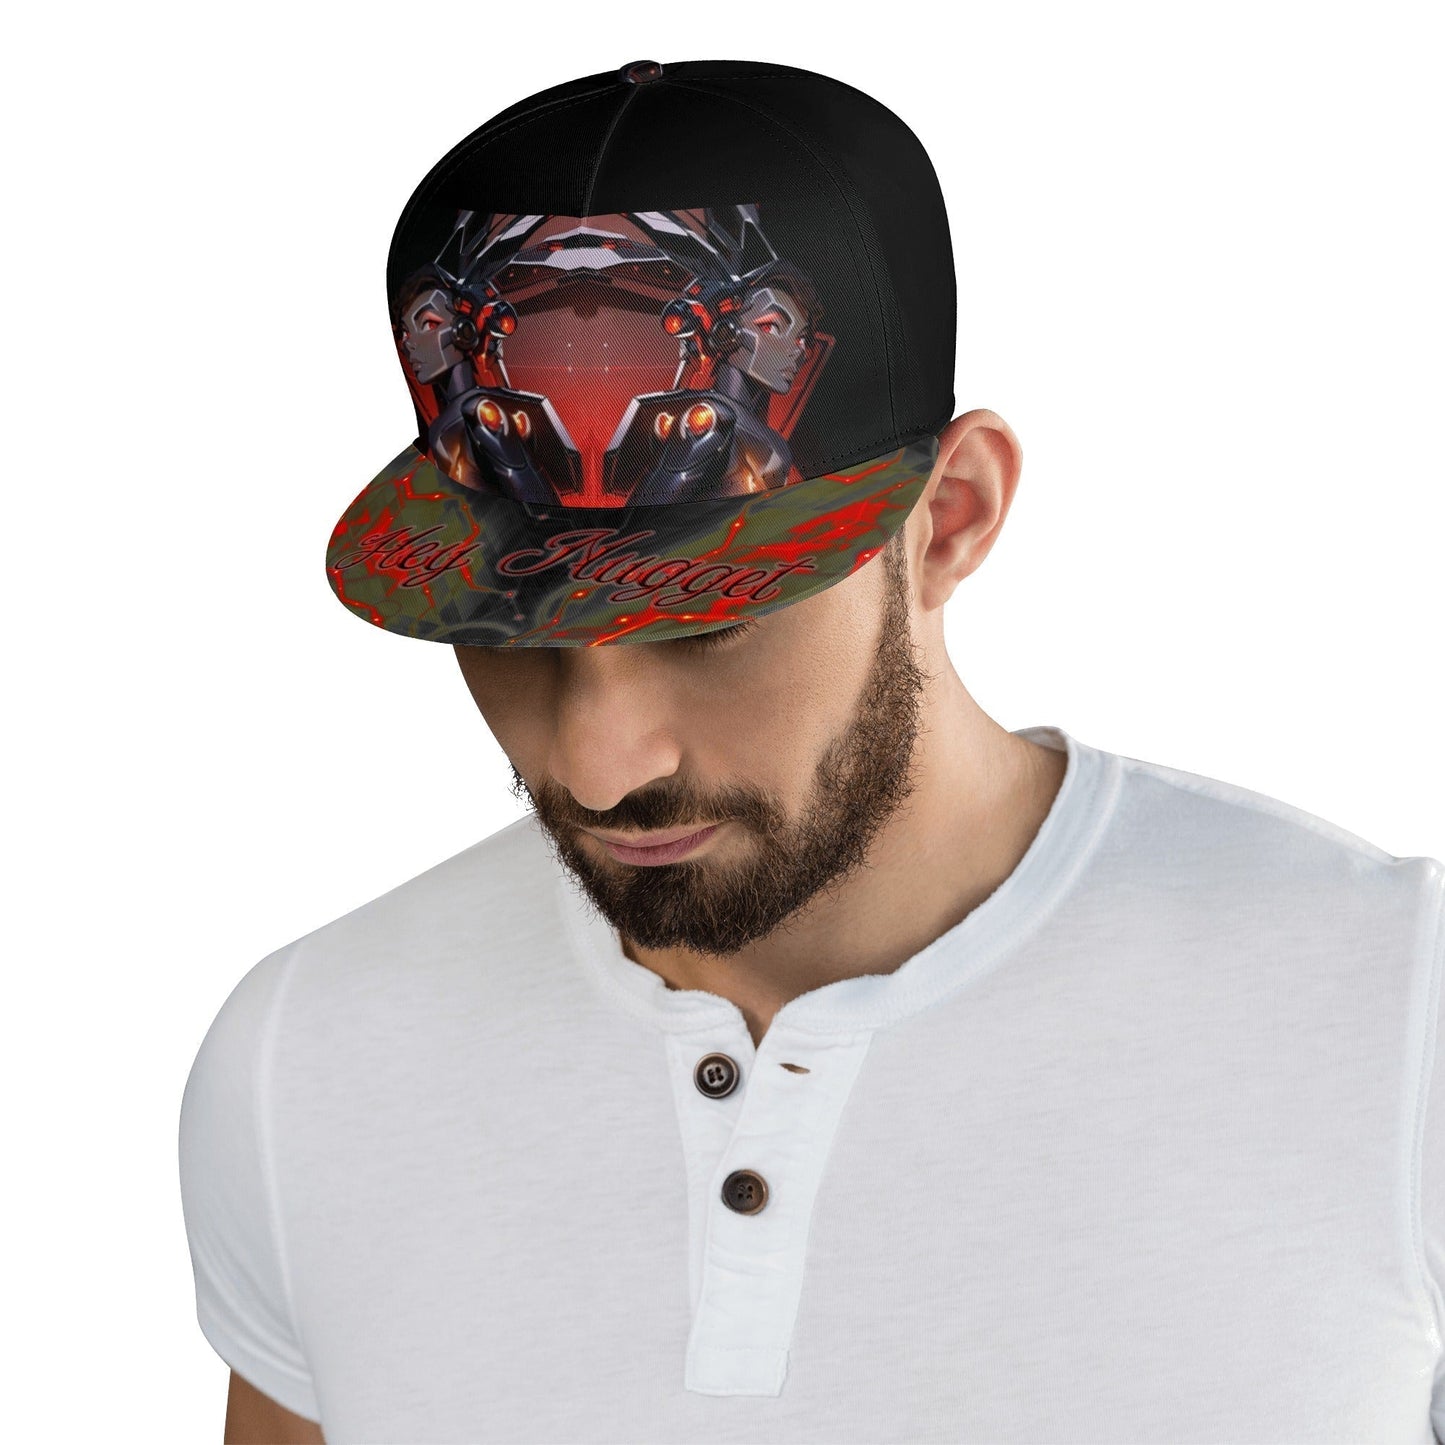 Stand out  with the  Hip-hop Caps  available at Hey Nugget. Grab yours today!